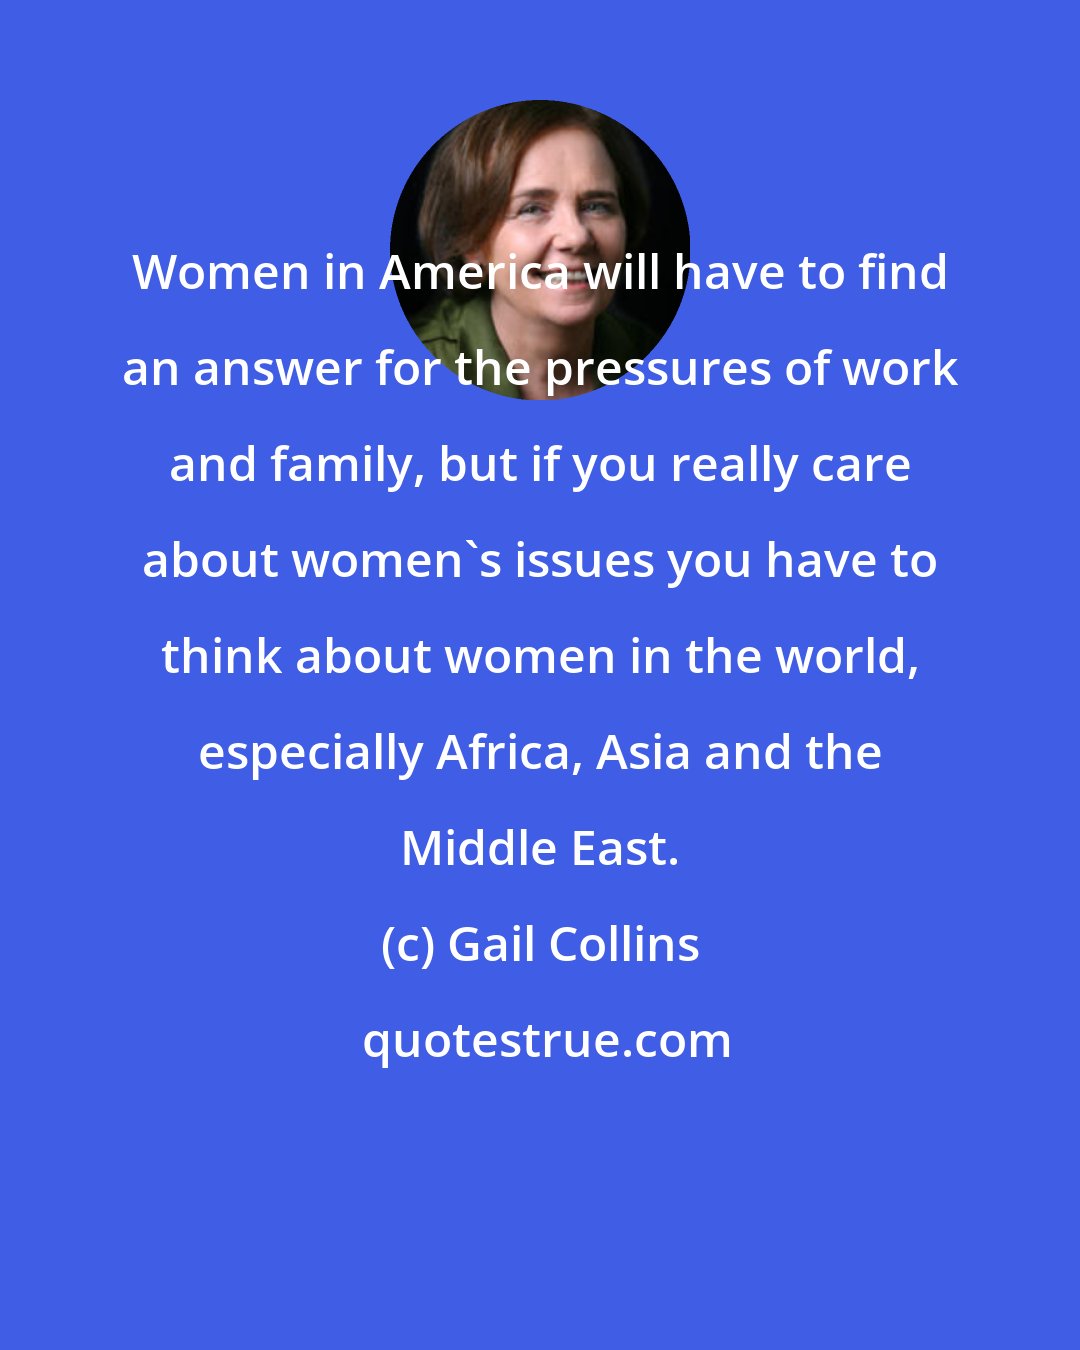 Gail Collins: Women in America will have to find an answer for the pressures of work and family, but if you really care about women's issues you have to think about women in the world, especially Africa, Asia and the Middle East.